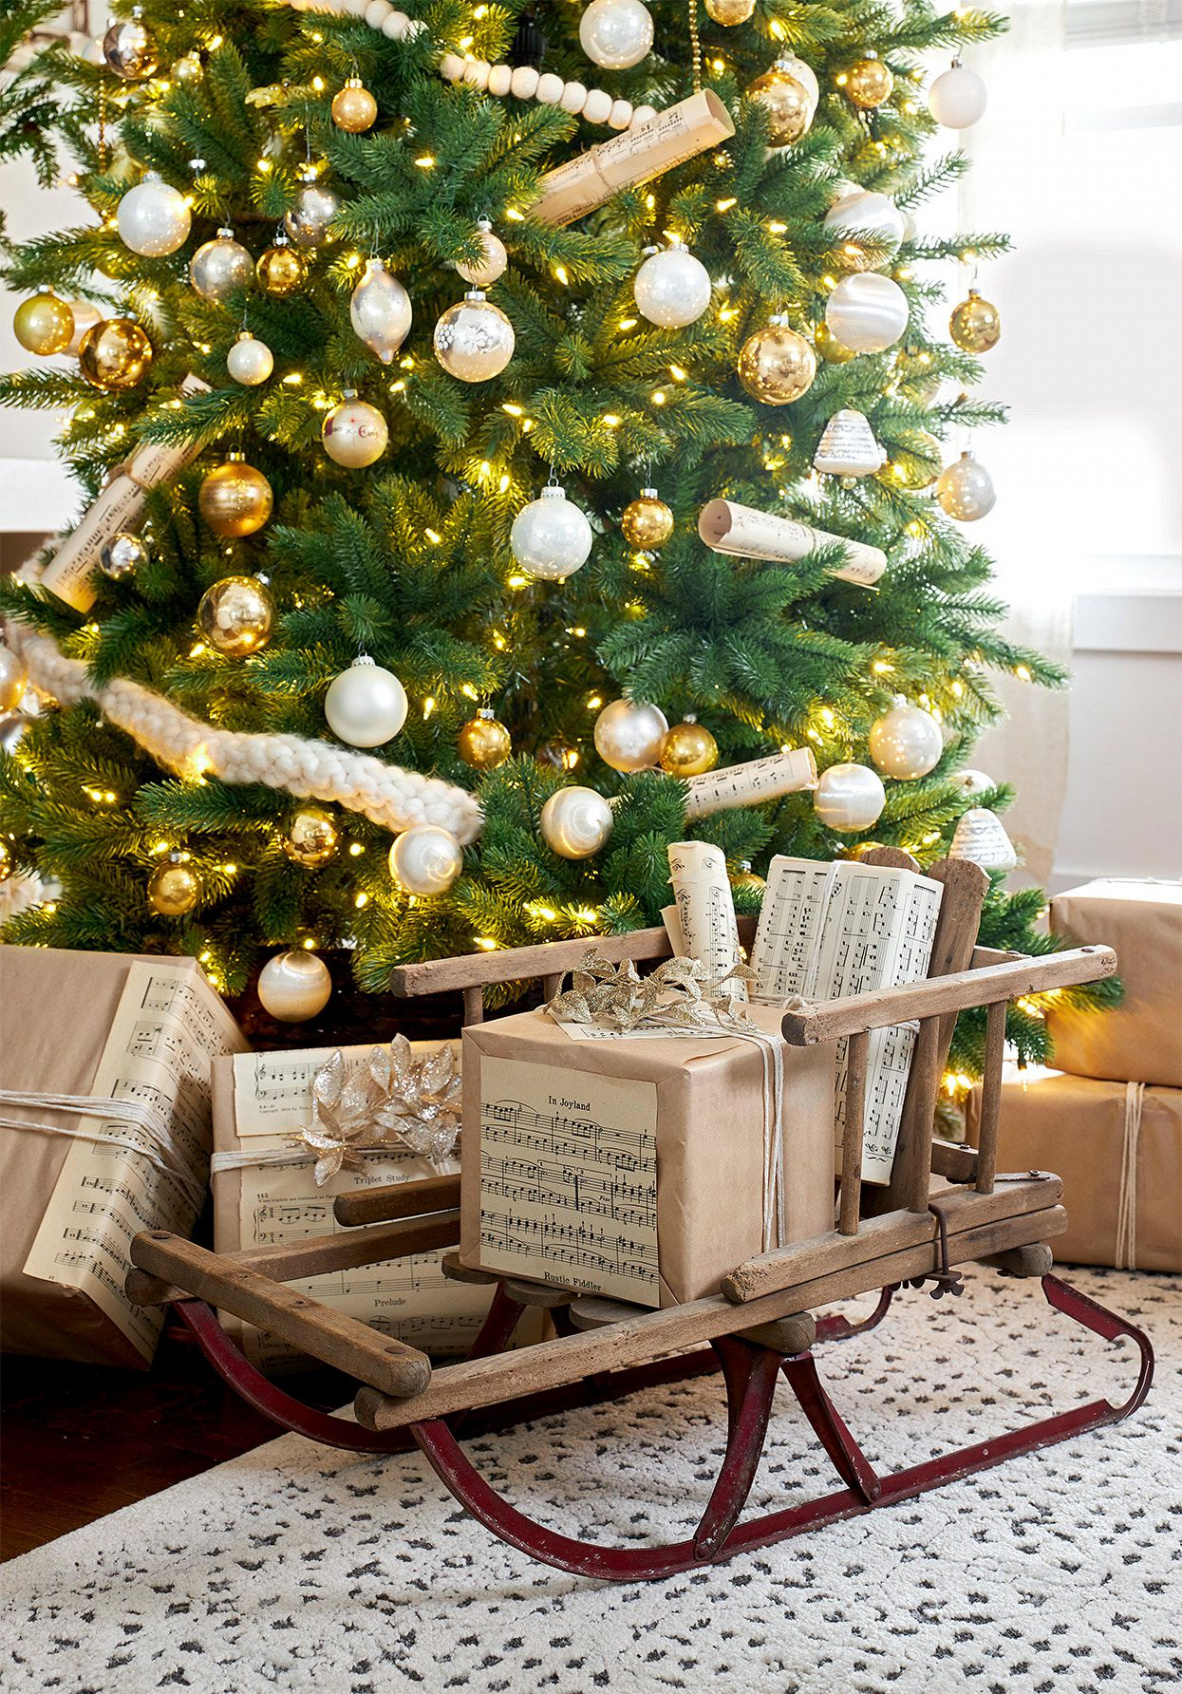 Vintage Christmas Decorating Ideas That Give Us the Holiday Feels